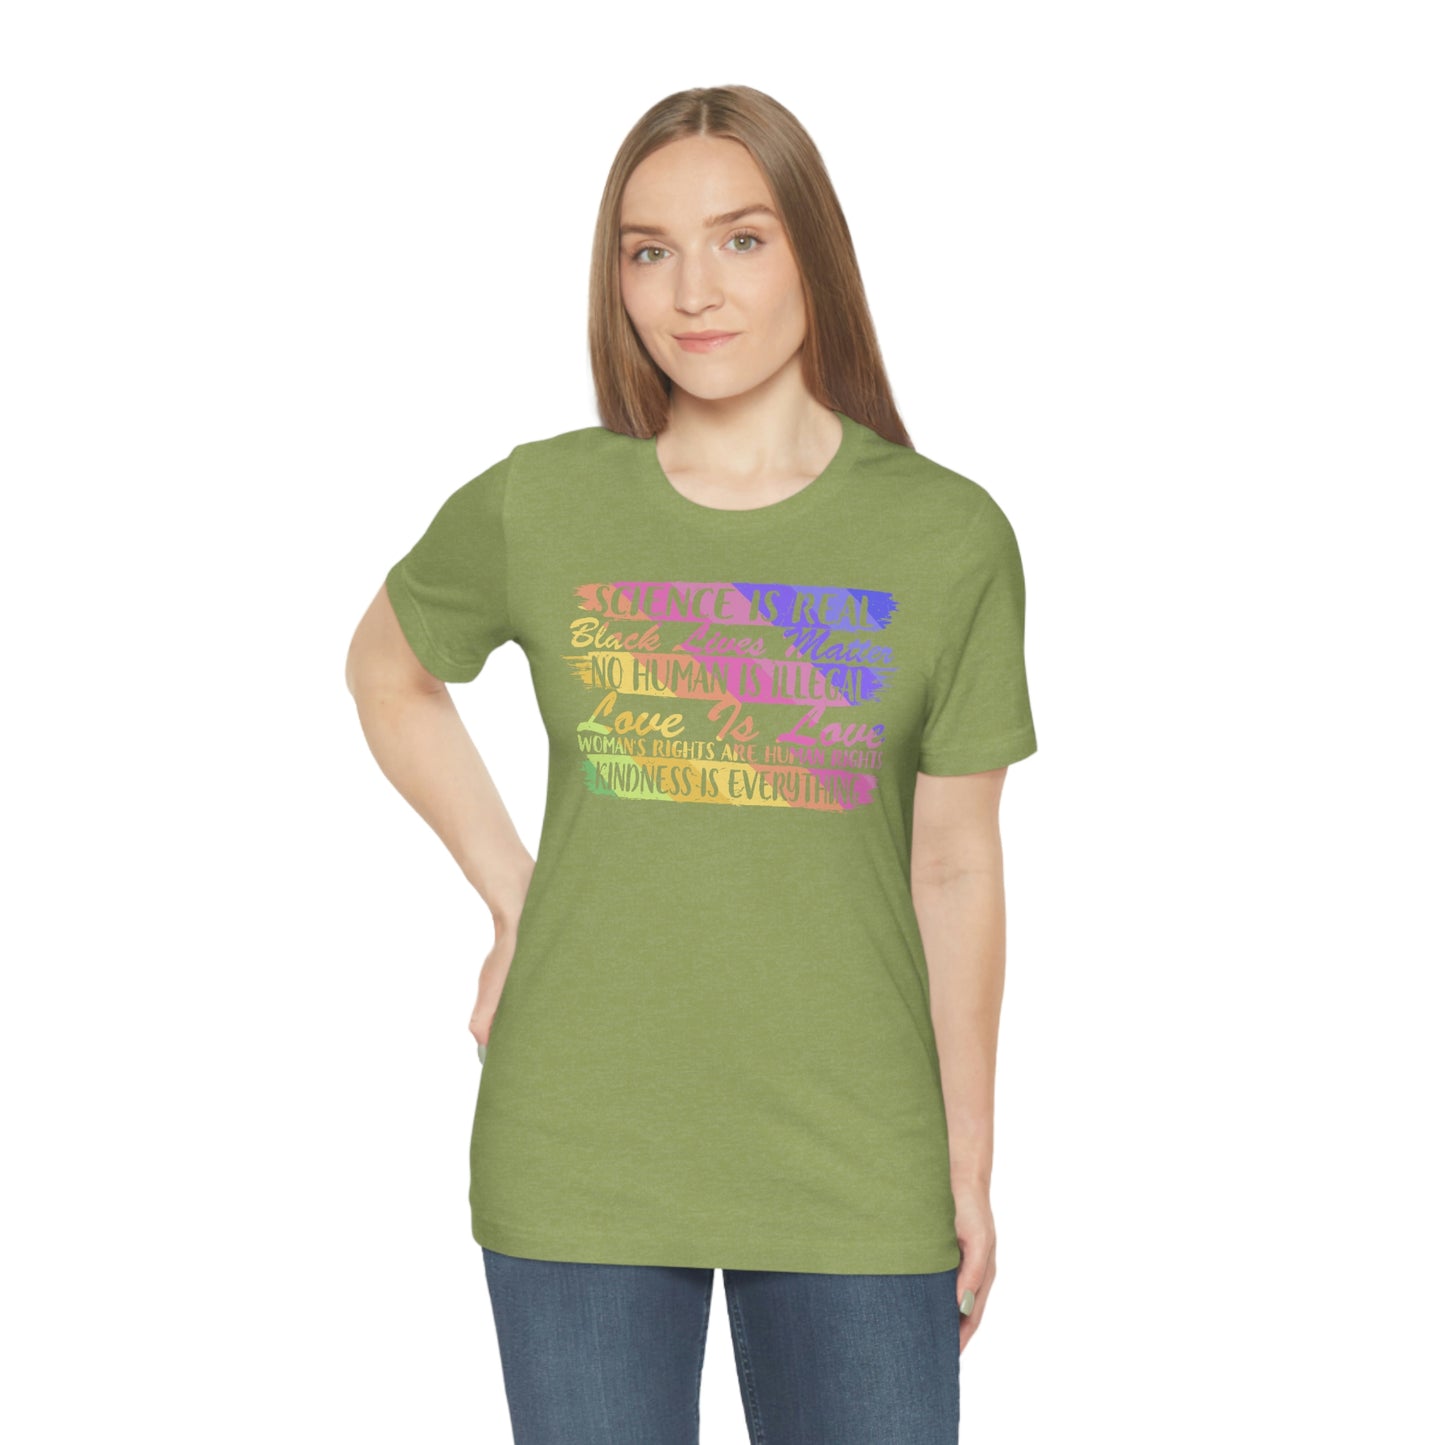 Kindness is Everything Print Unisex Jersey Short Sleeve Tee